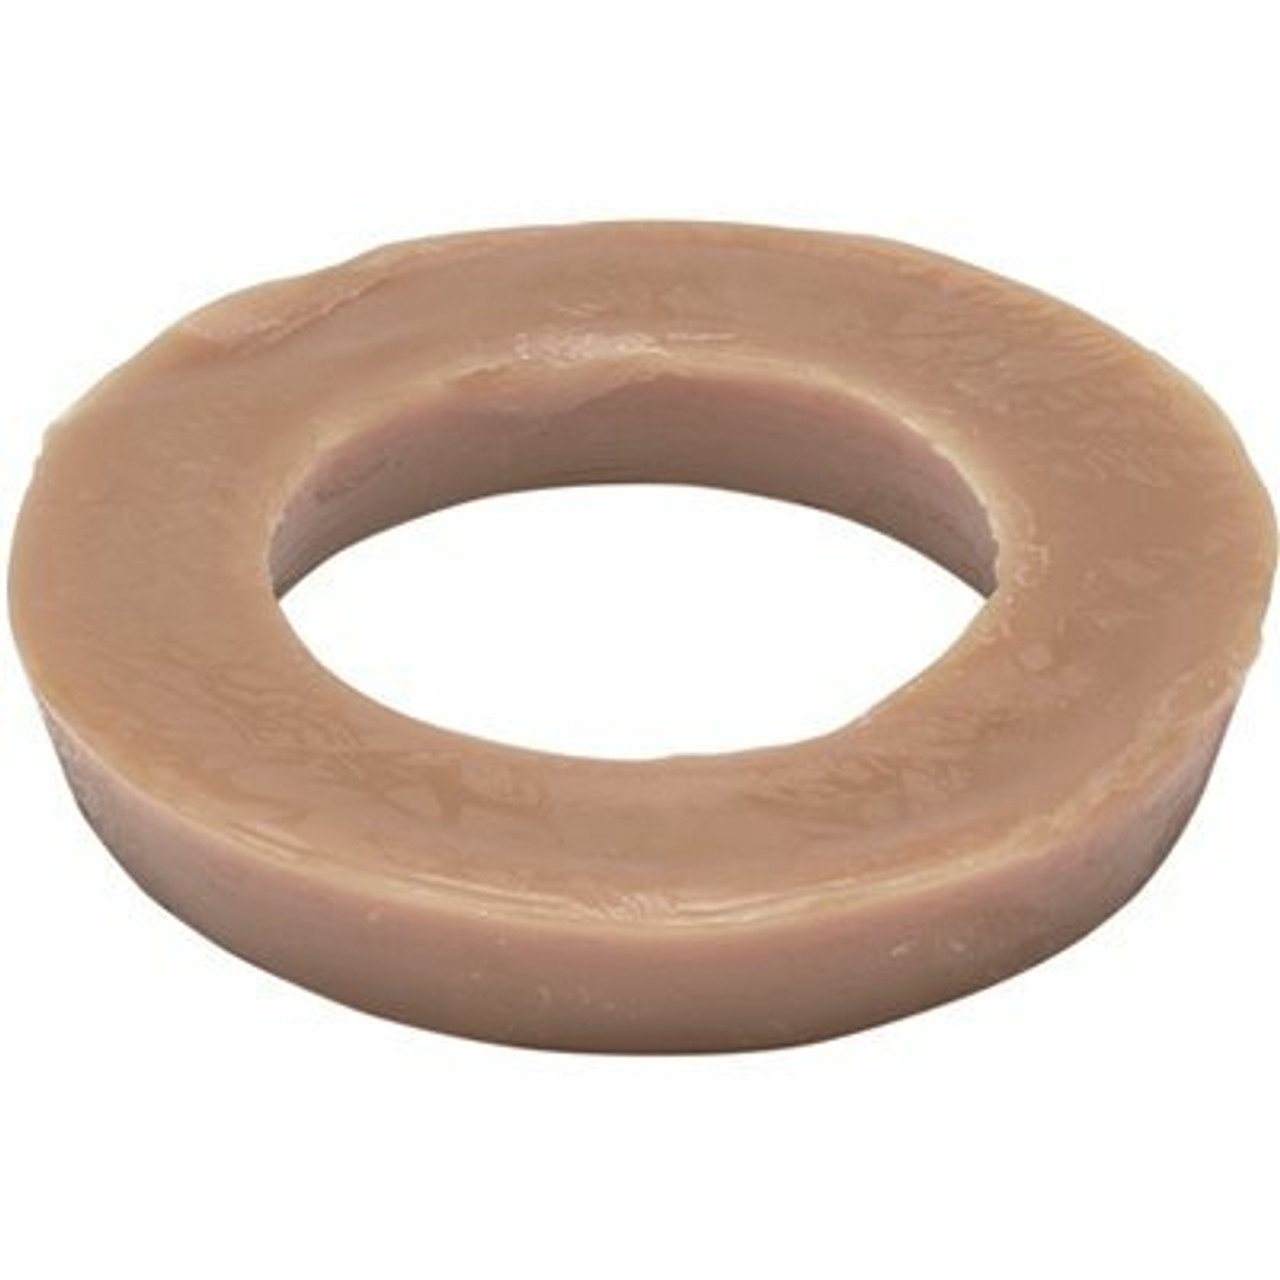 Hercules Johni-Ring 3 In. - 4 In. Standard Toilet Wax Ring With Plastic Horn